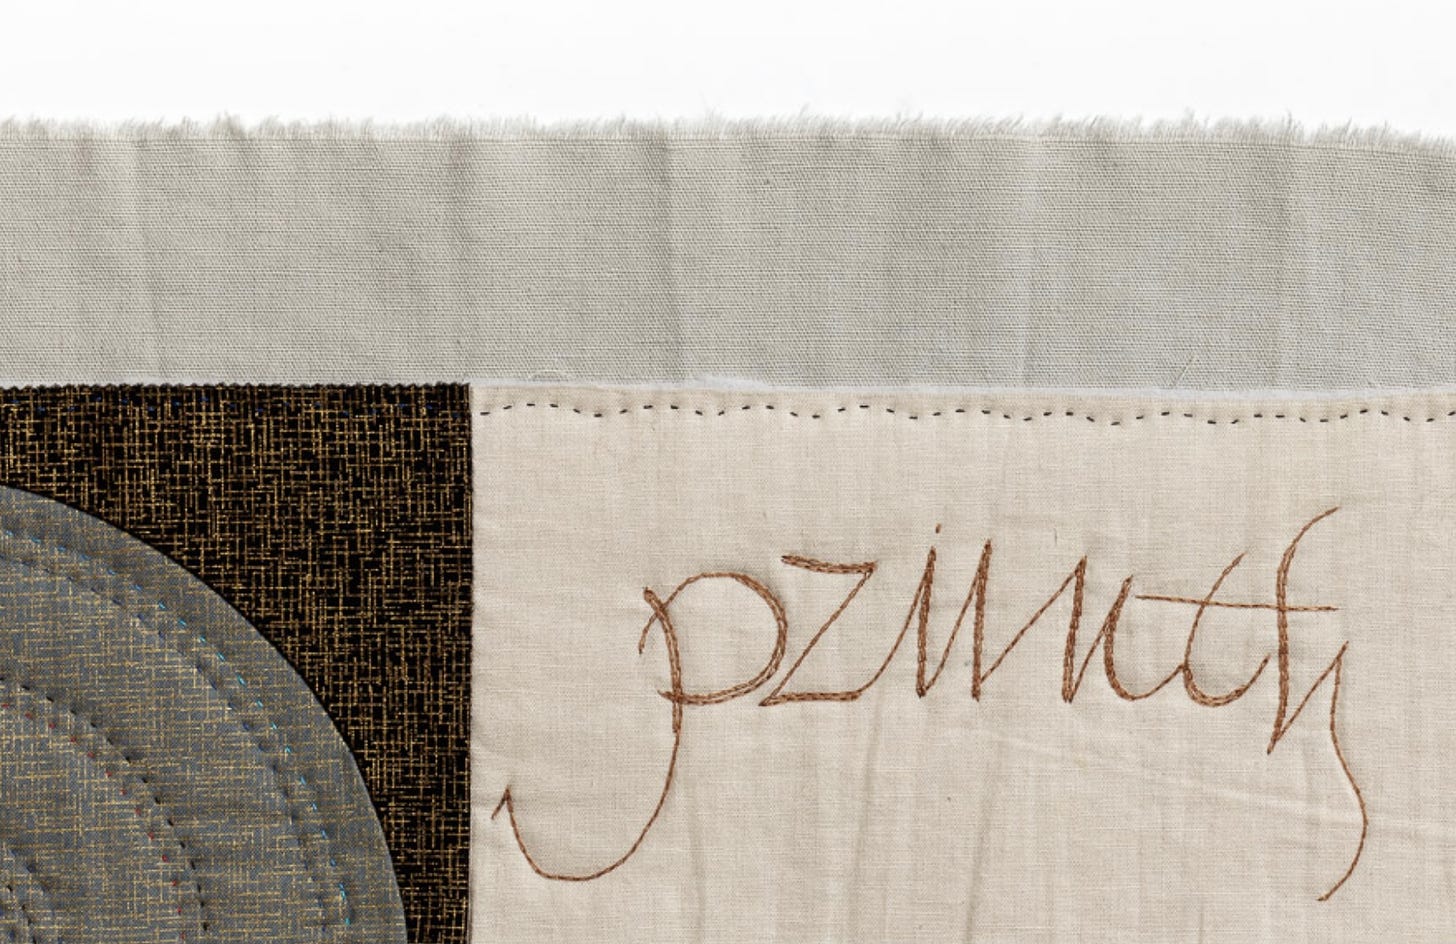 The quilted word “Princess” in 16th century lettering